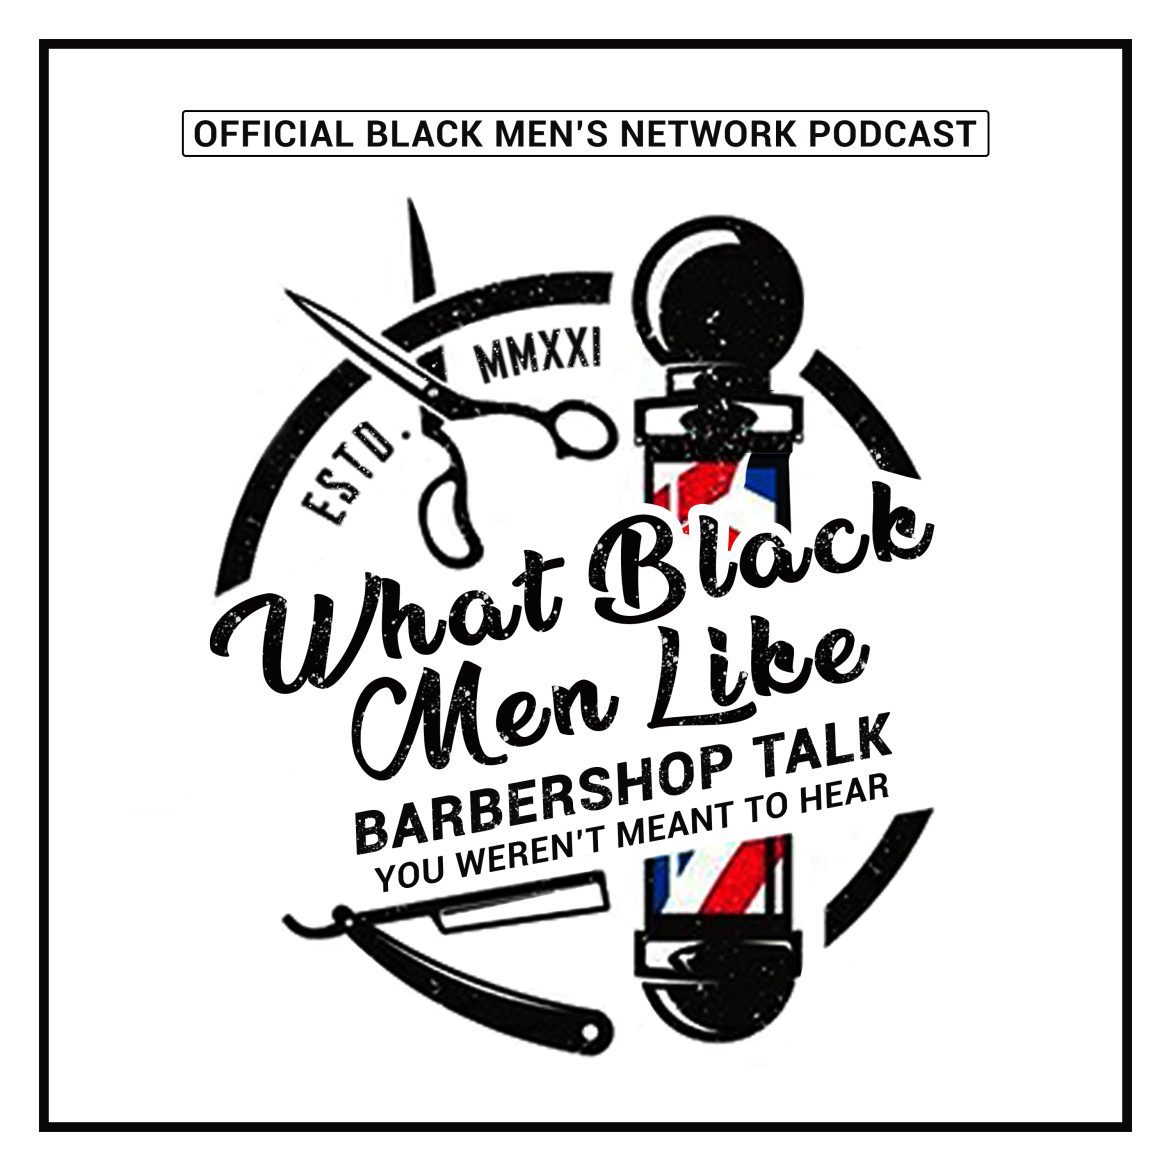 Black Podcasting - Why Did You Choose Your "Ex"??? (The "Ex" Episode)